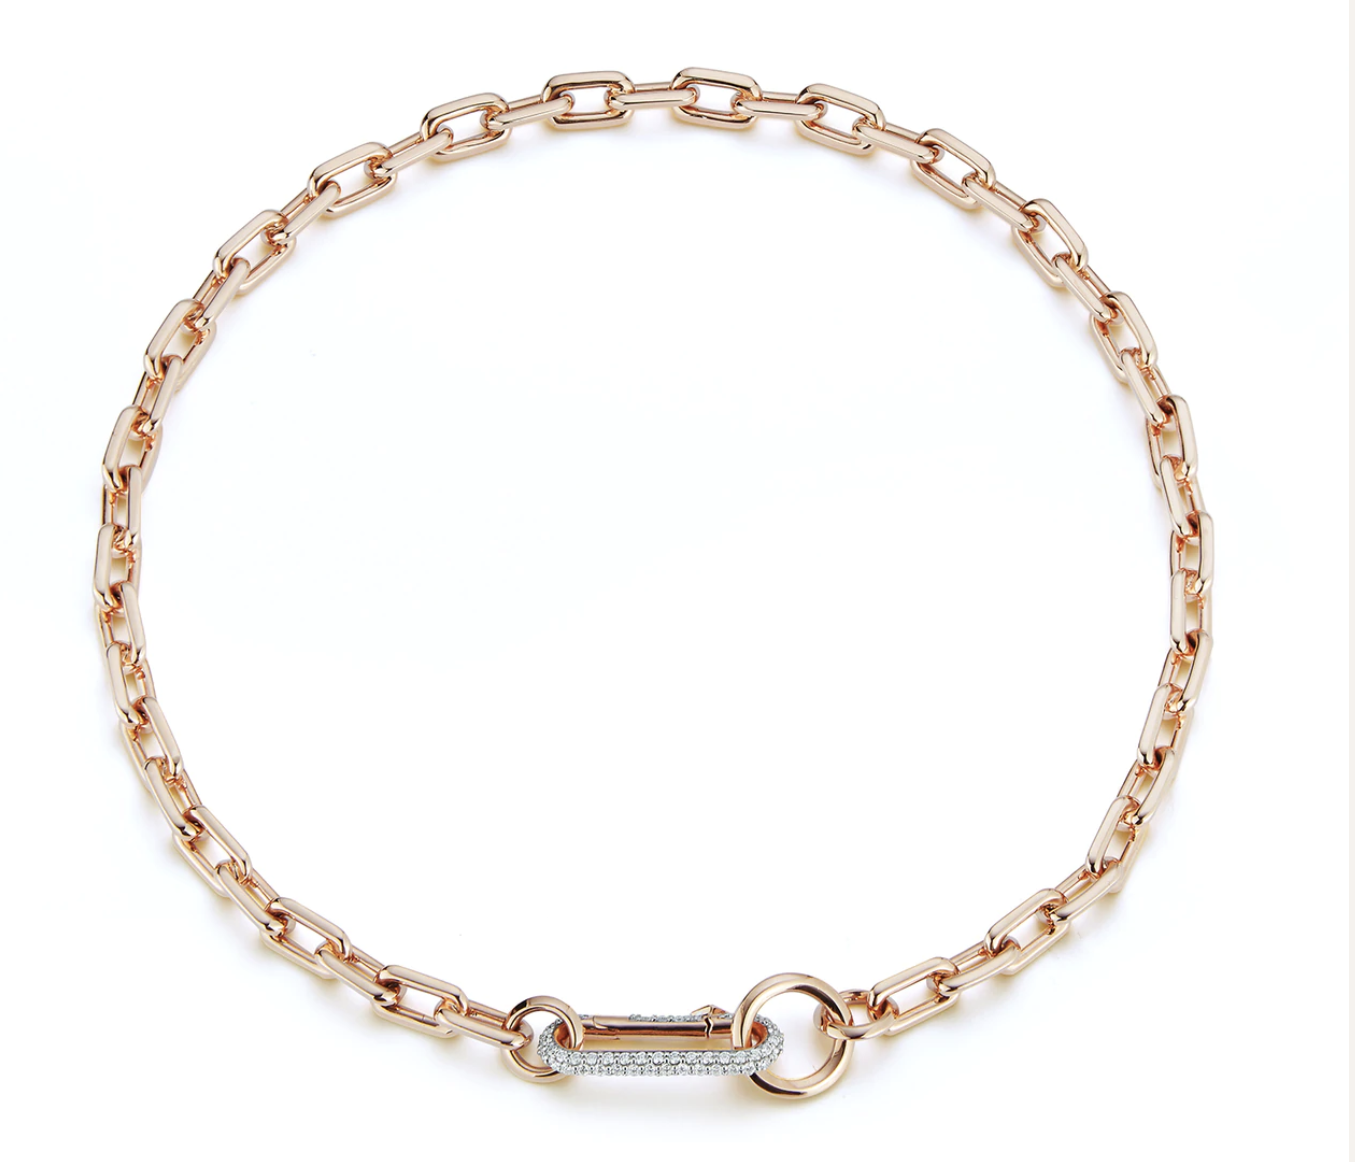 Saxon 18k rose gold chain link necklace with an elongated diamond link clasp 